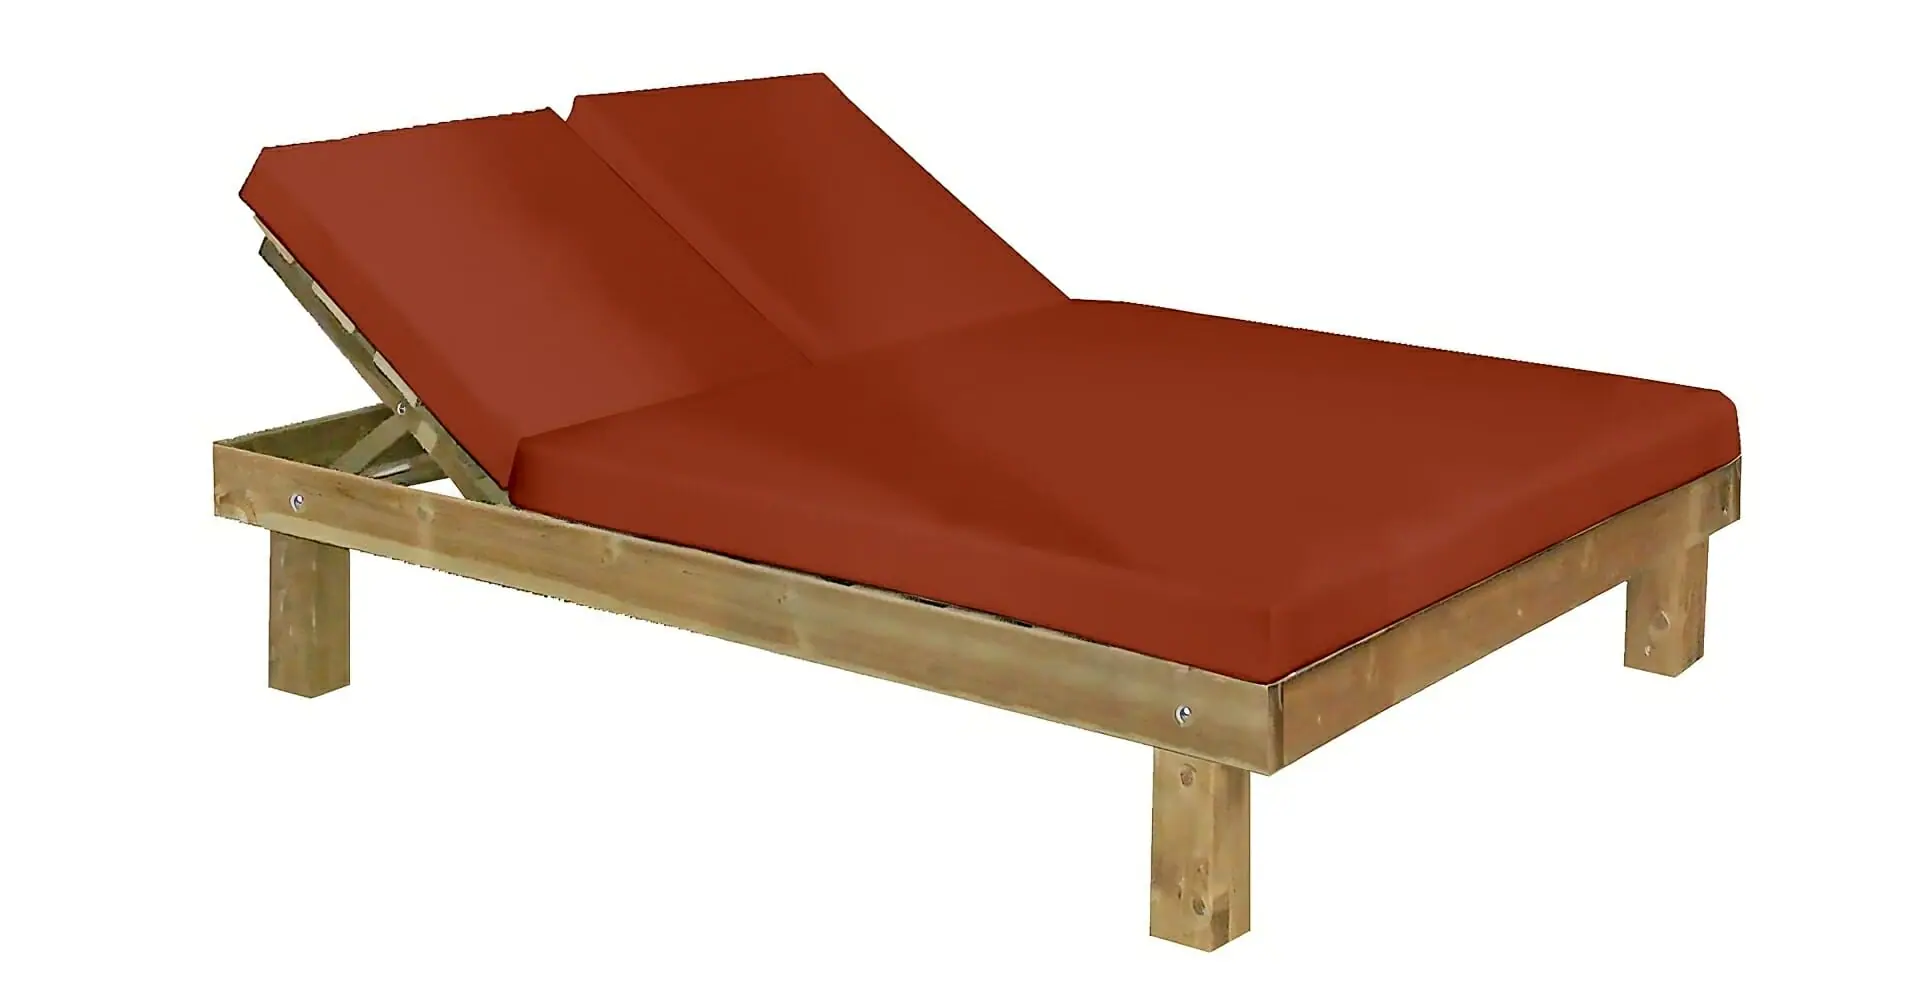 conva-madera-outdoor-double-sunbed-wooden-collection-4